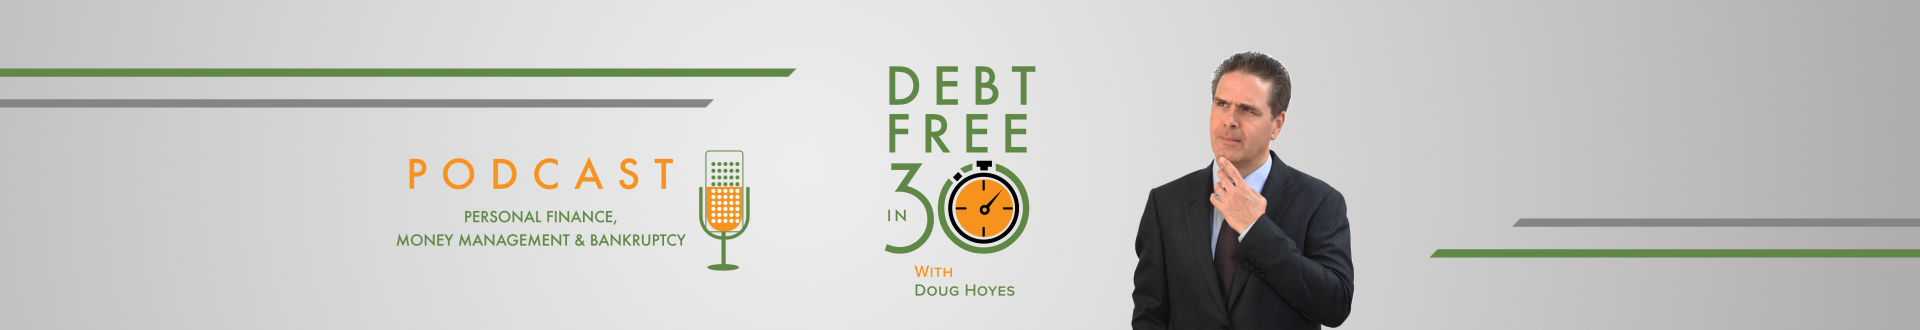 Debt Free in 30 Podcast Archive - Page 4